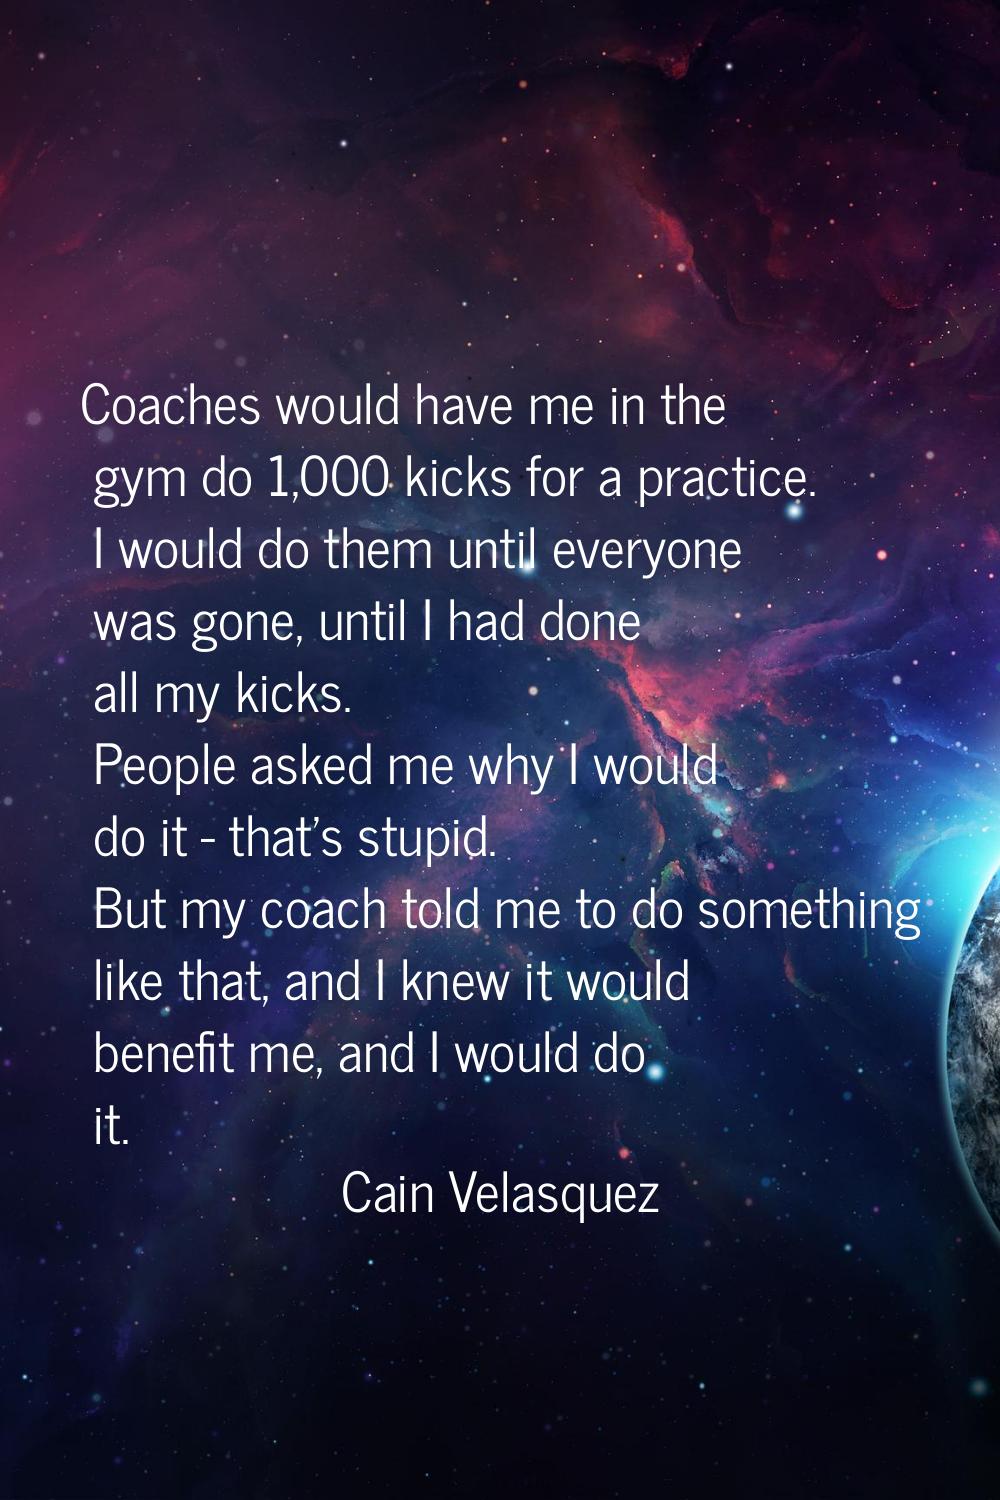 Coaches would have me in the gym do 1,000 kicks for a practice. I would do them until everyone was 